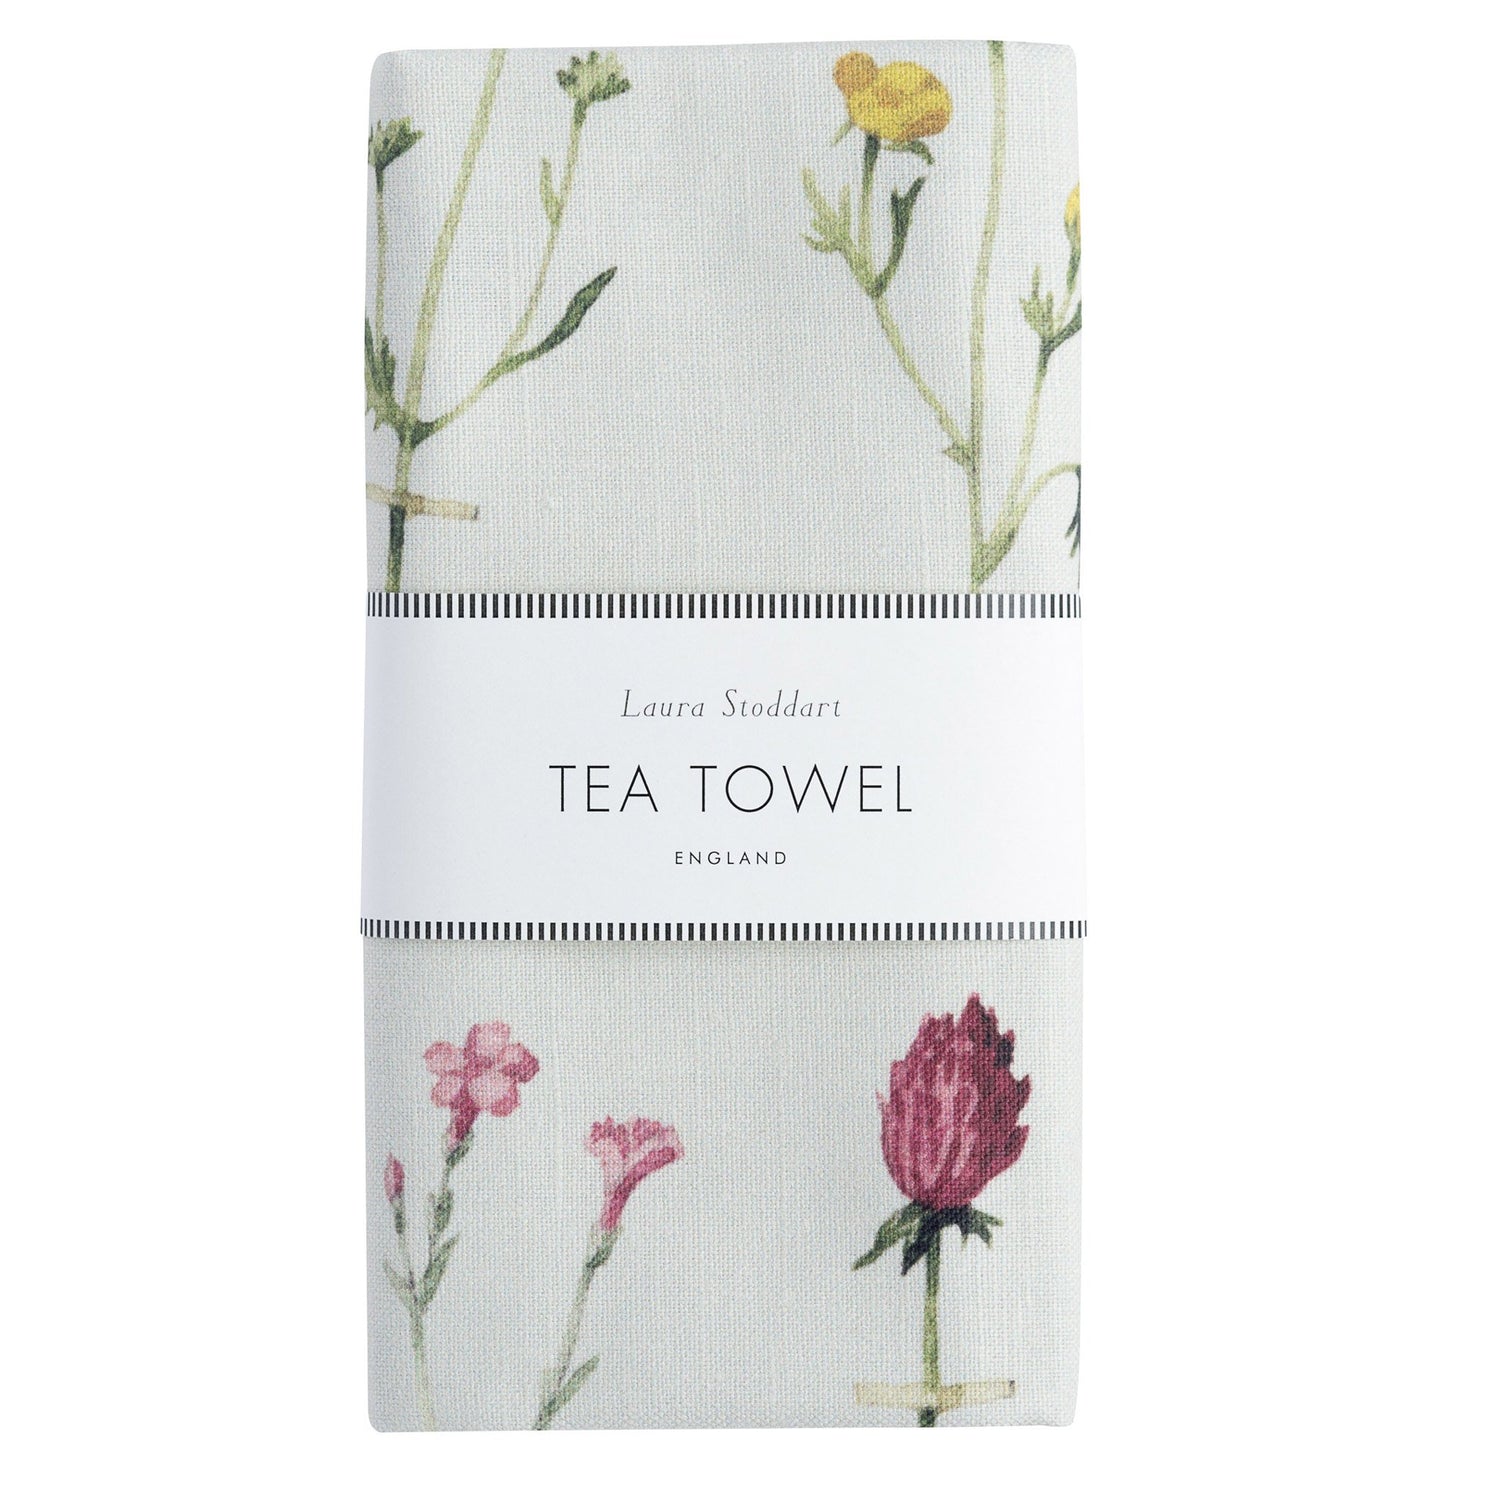 tea towel, linen union, unbleached cotton, illustration, wild flowers, flowers, made in england